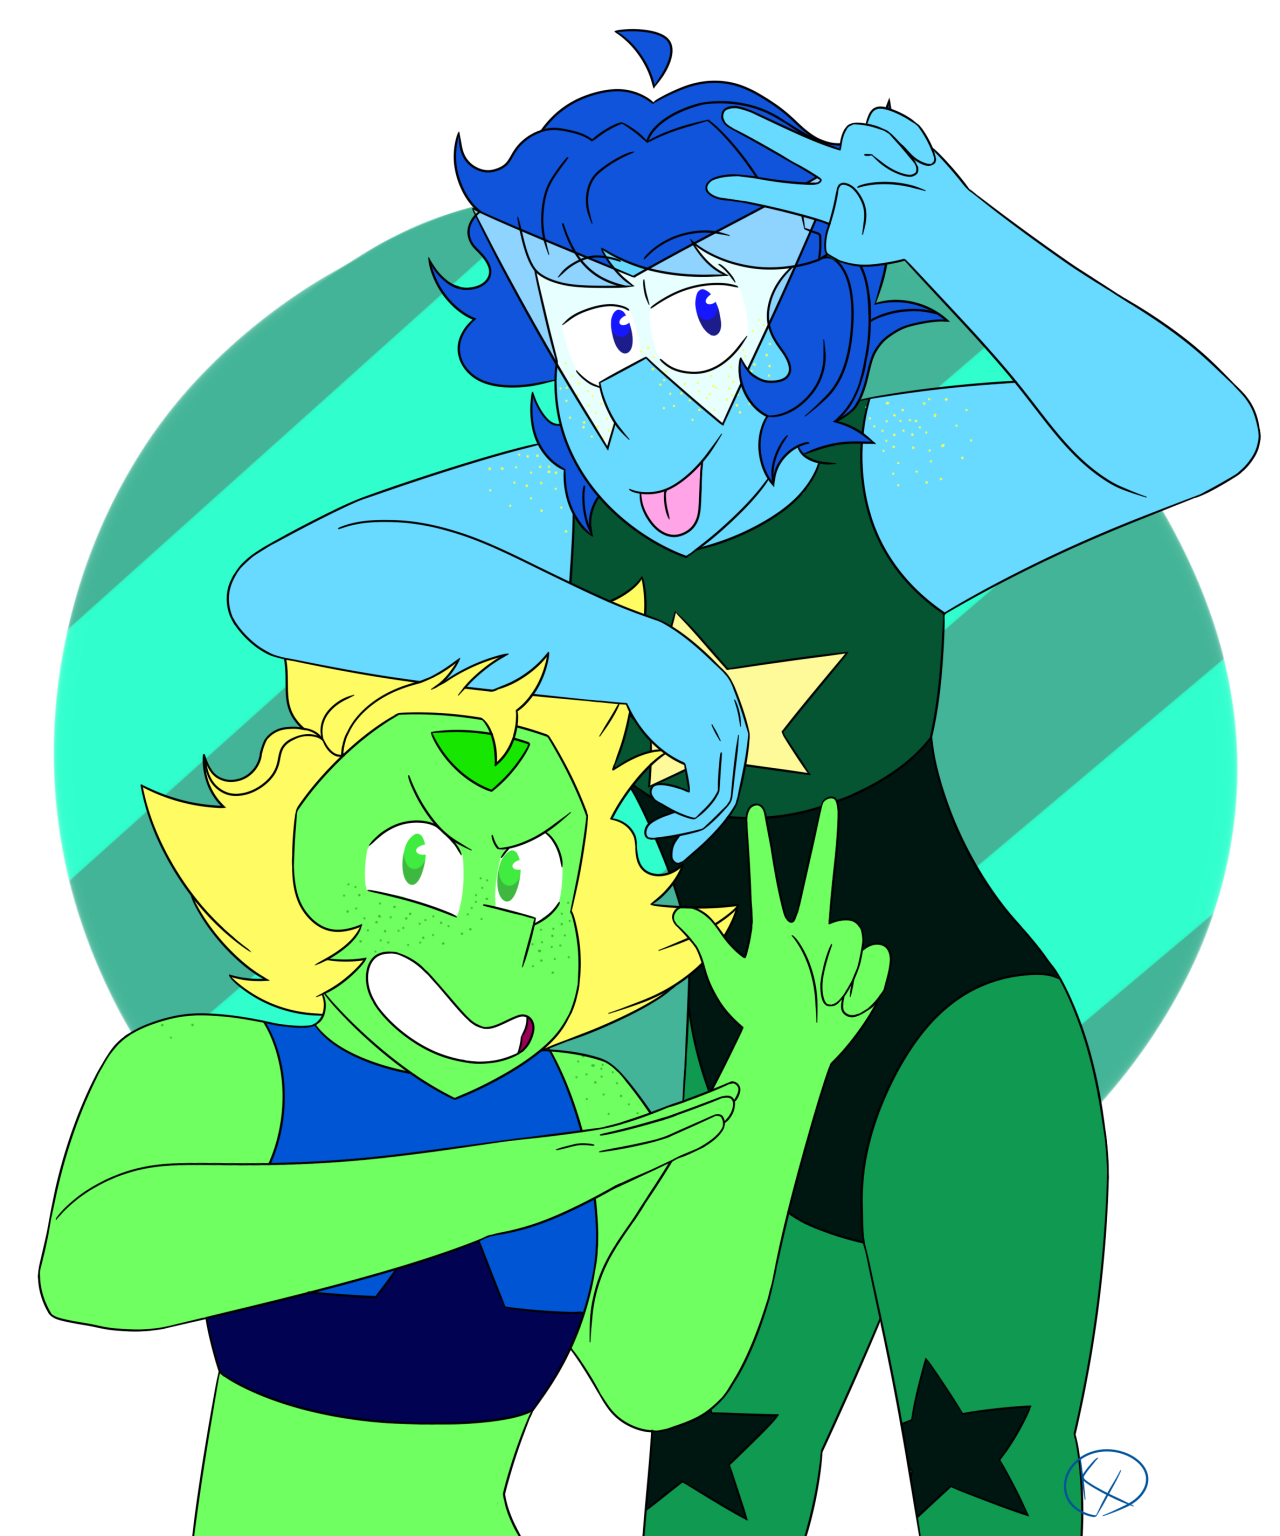 Anonymous said: Peridot and lapis outfit swap? Answer: Decided to upload two versions